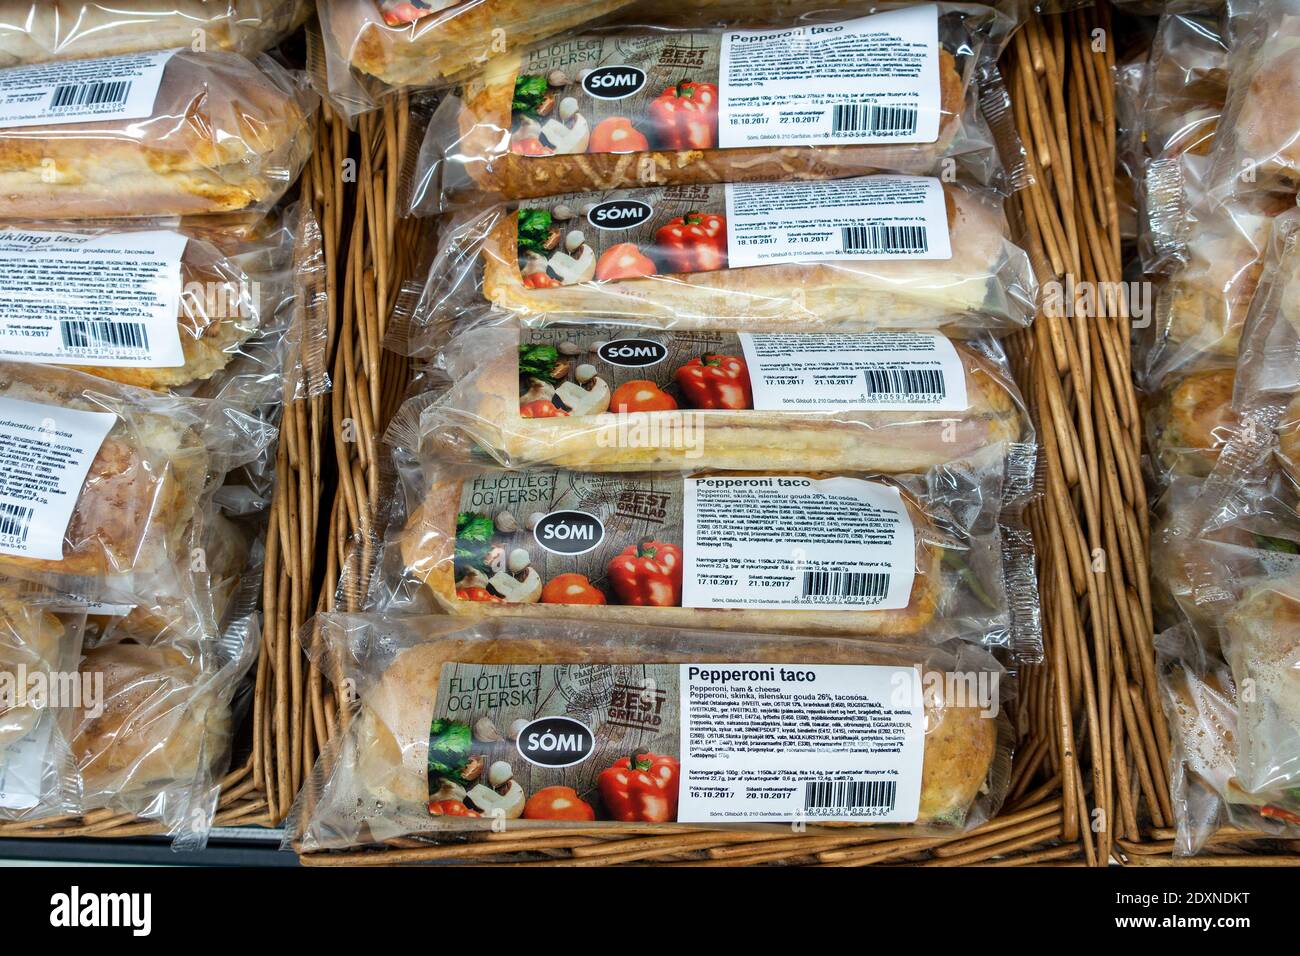 Somi Brand Pre Packed Sandwiches Pepperoni Taco For Sale In A Reykjavik Supermarket Iceland Stock Photo